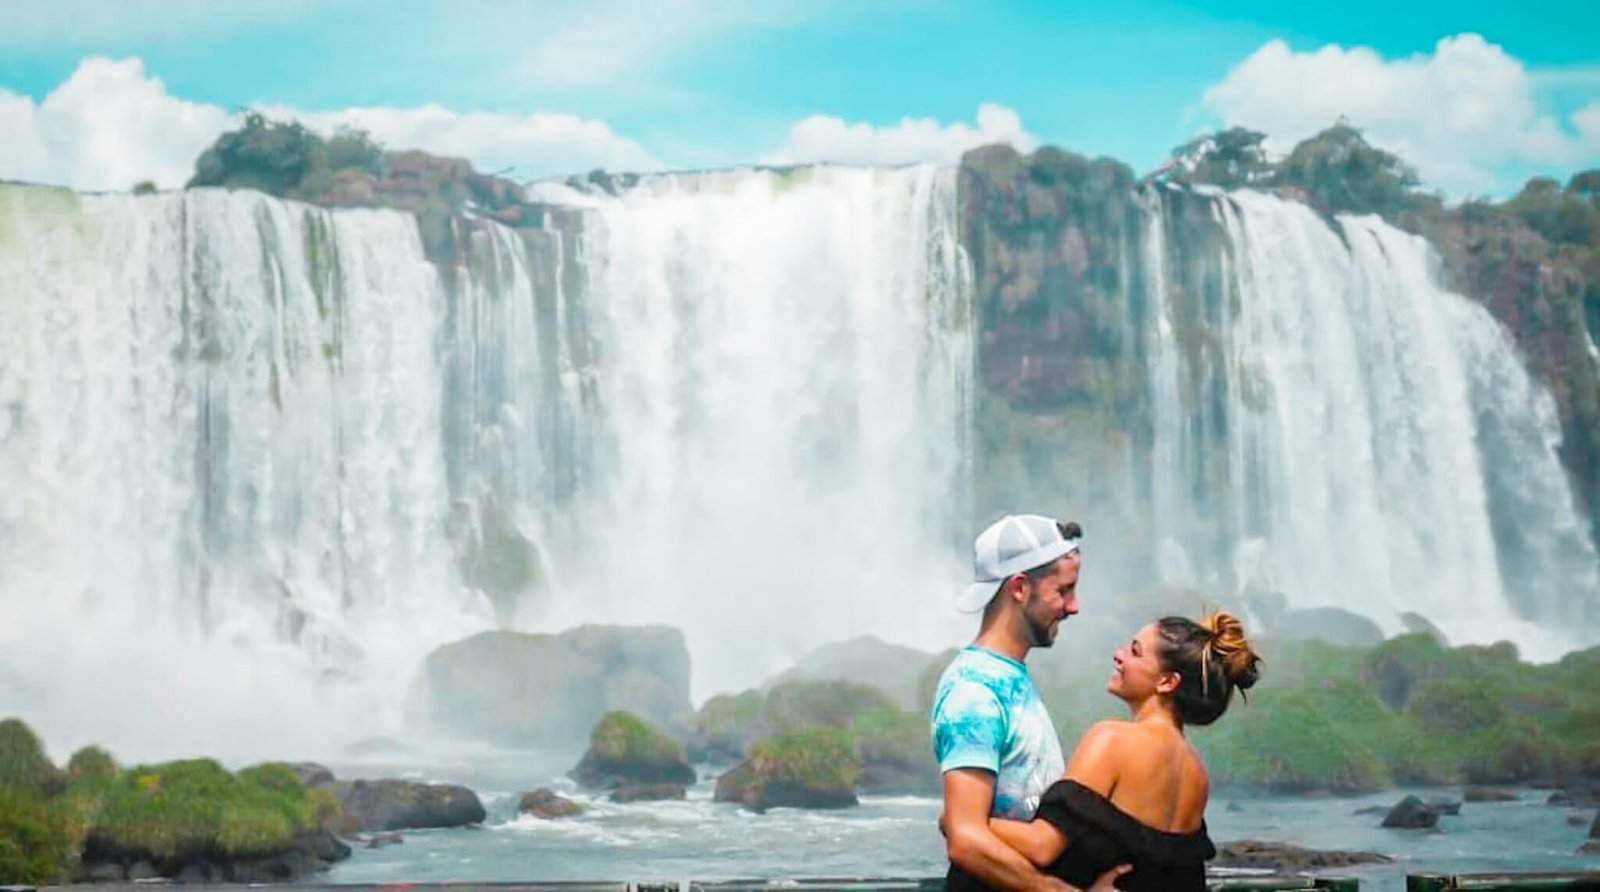 Iguazu Falls, best places to visit in the south of Brazil